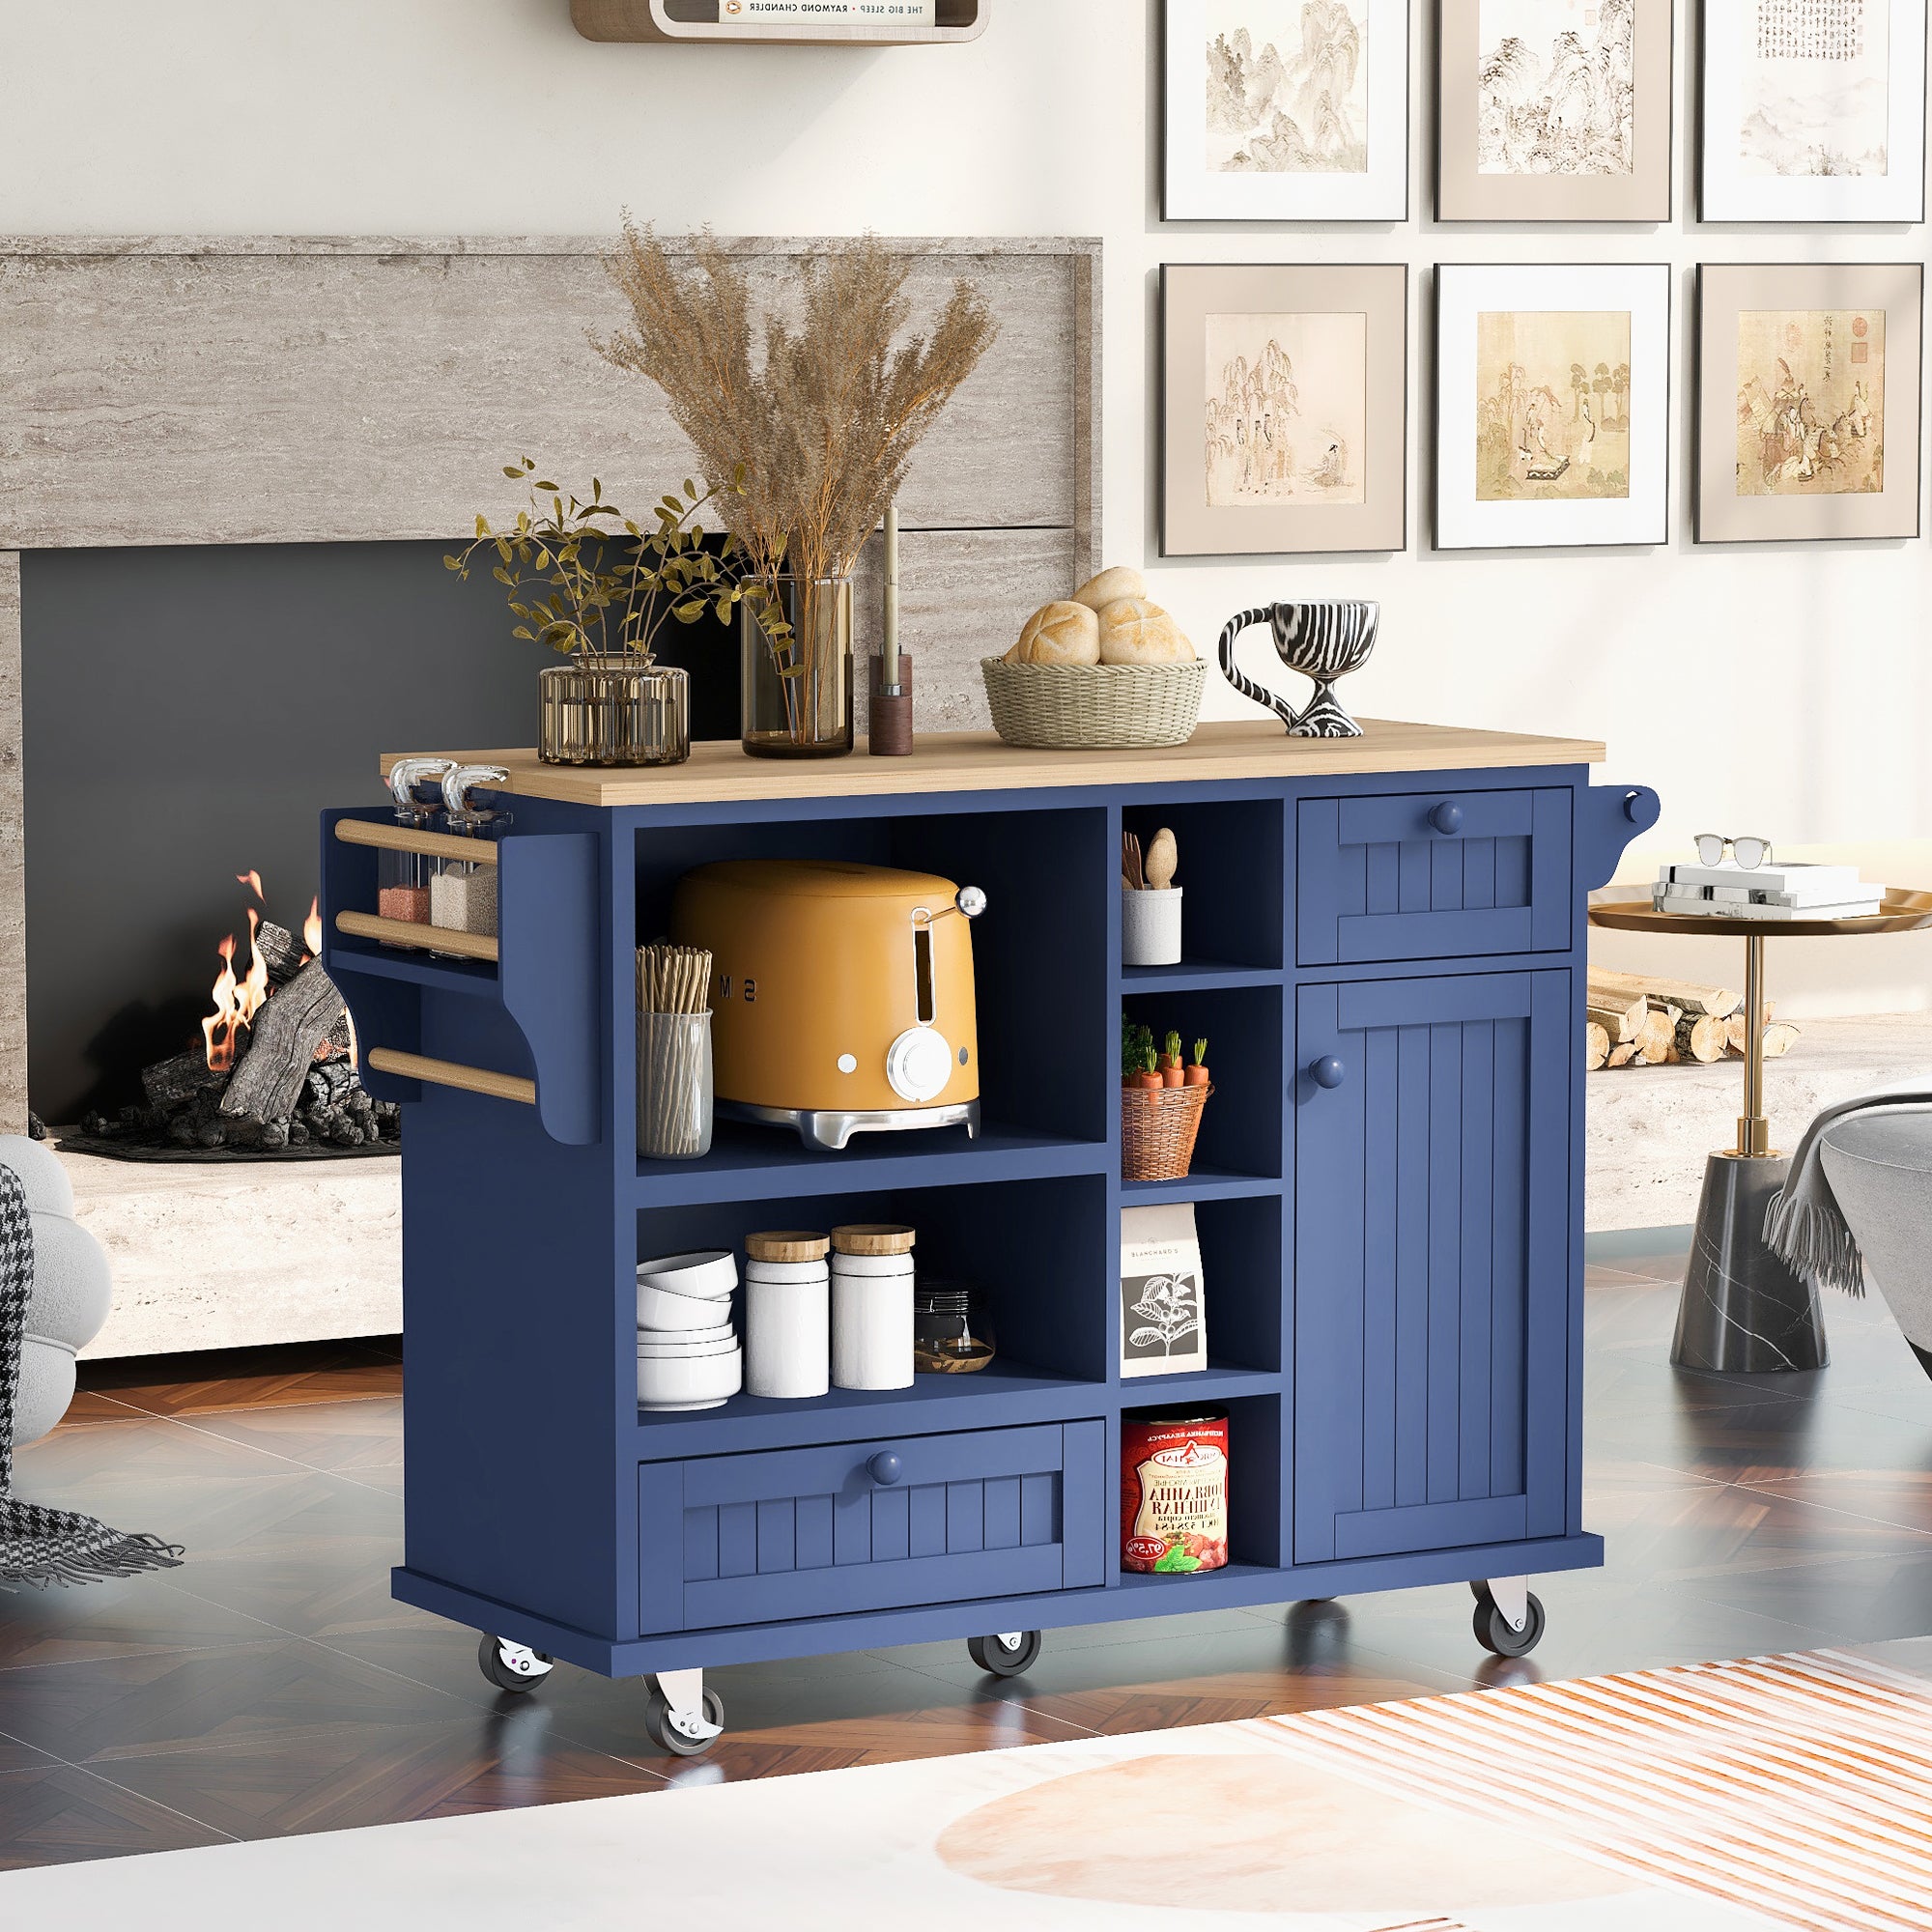 50.80" Dark Blue Rolling Kitchen Cart with Solid Wood Top